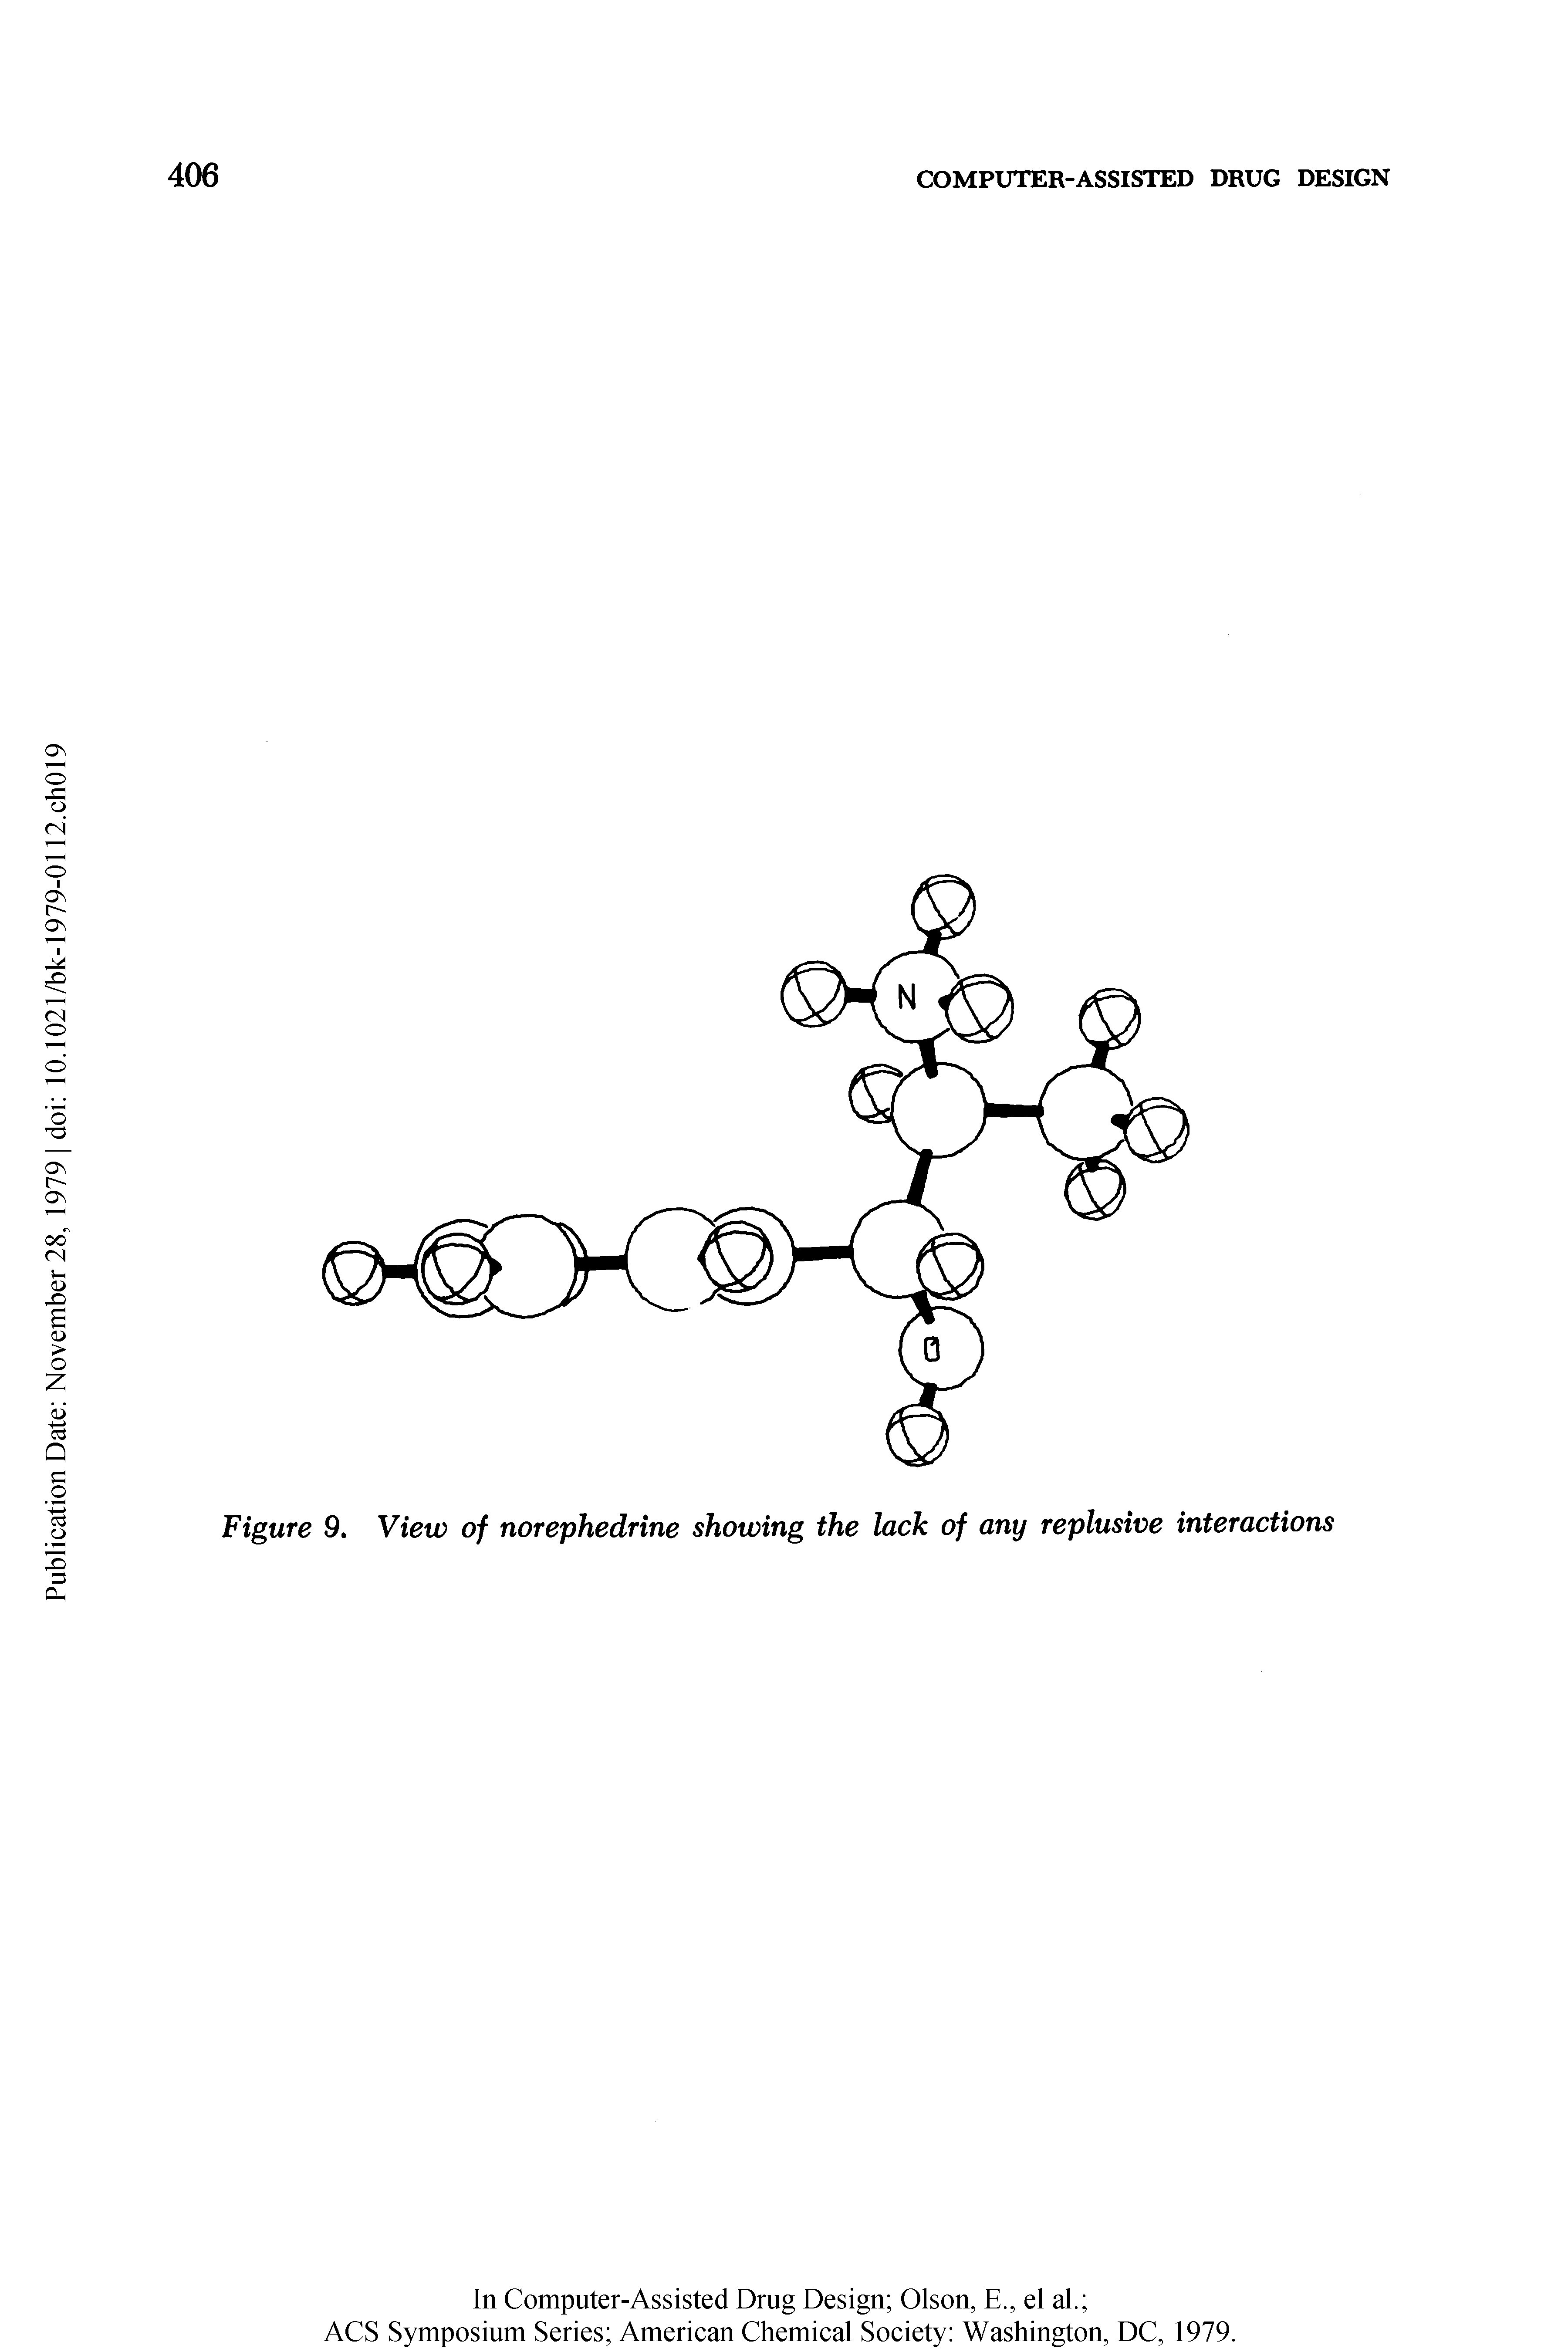 Figure 9. View of norephedrine showing the lack of any replusive interactions...